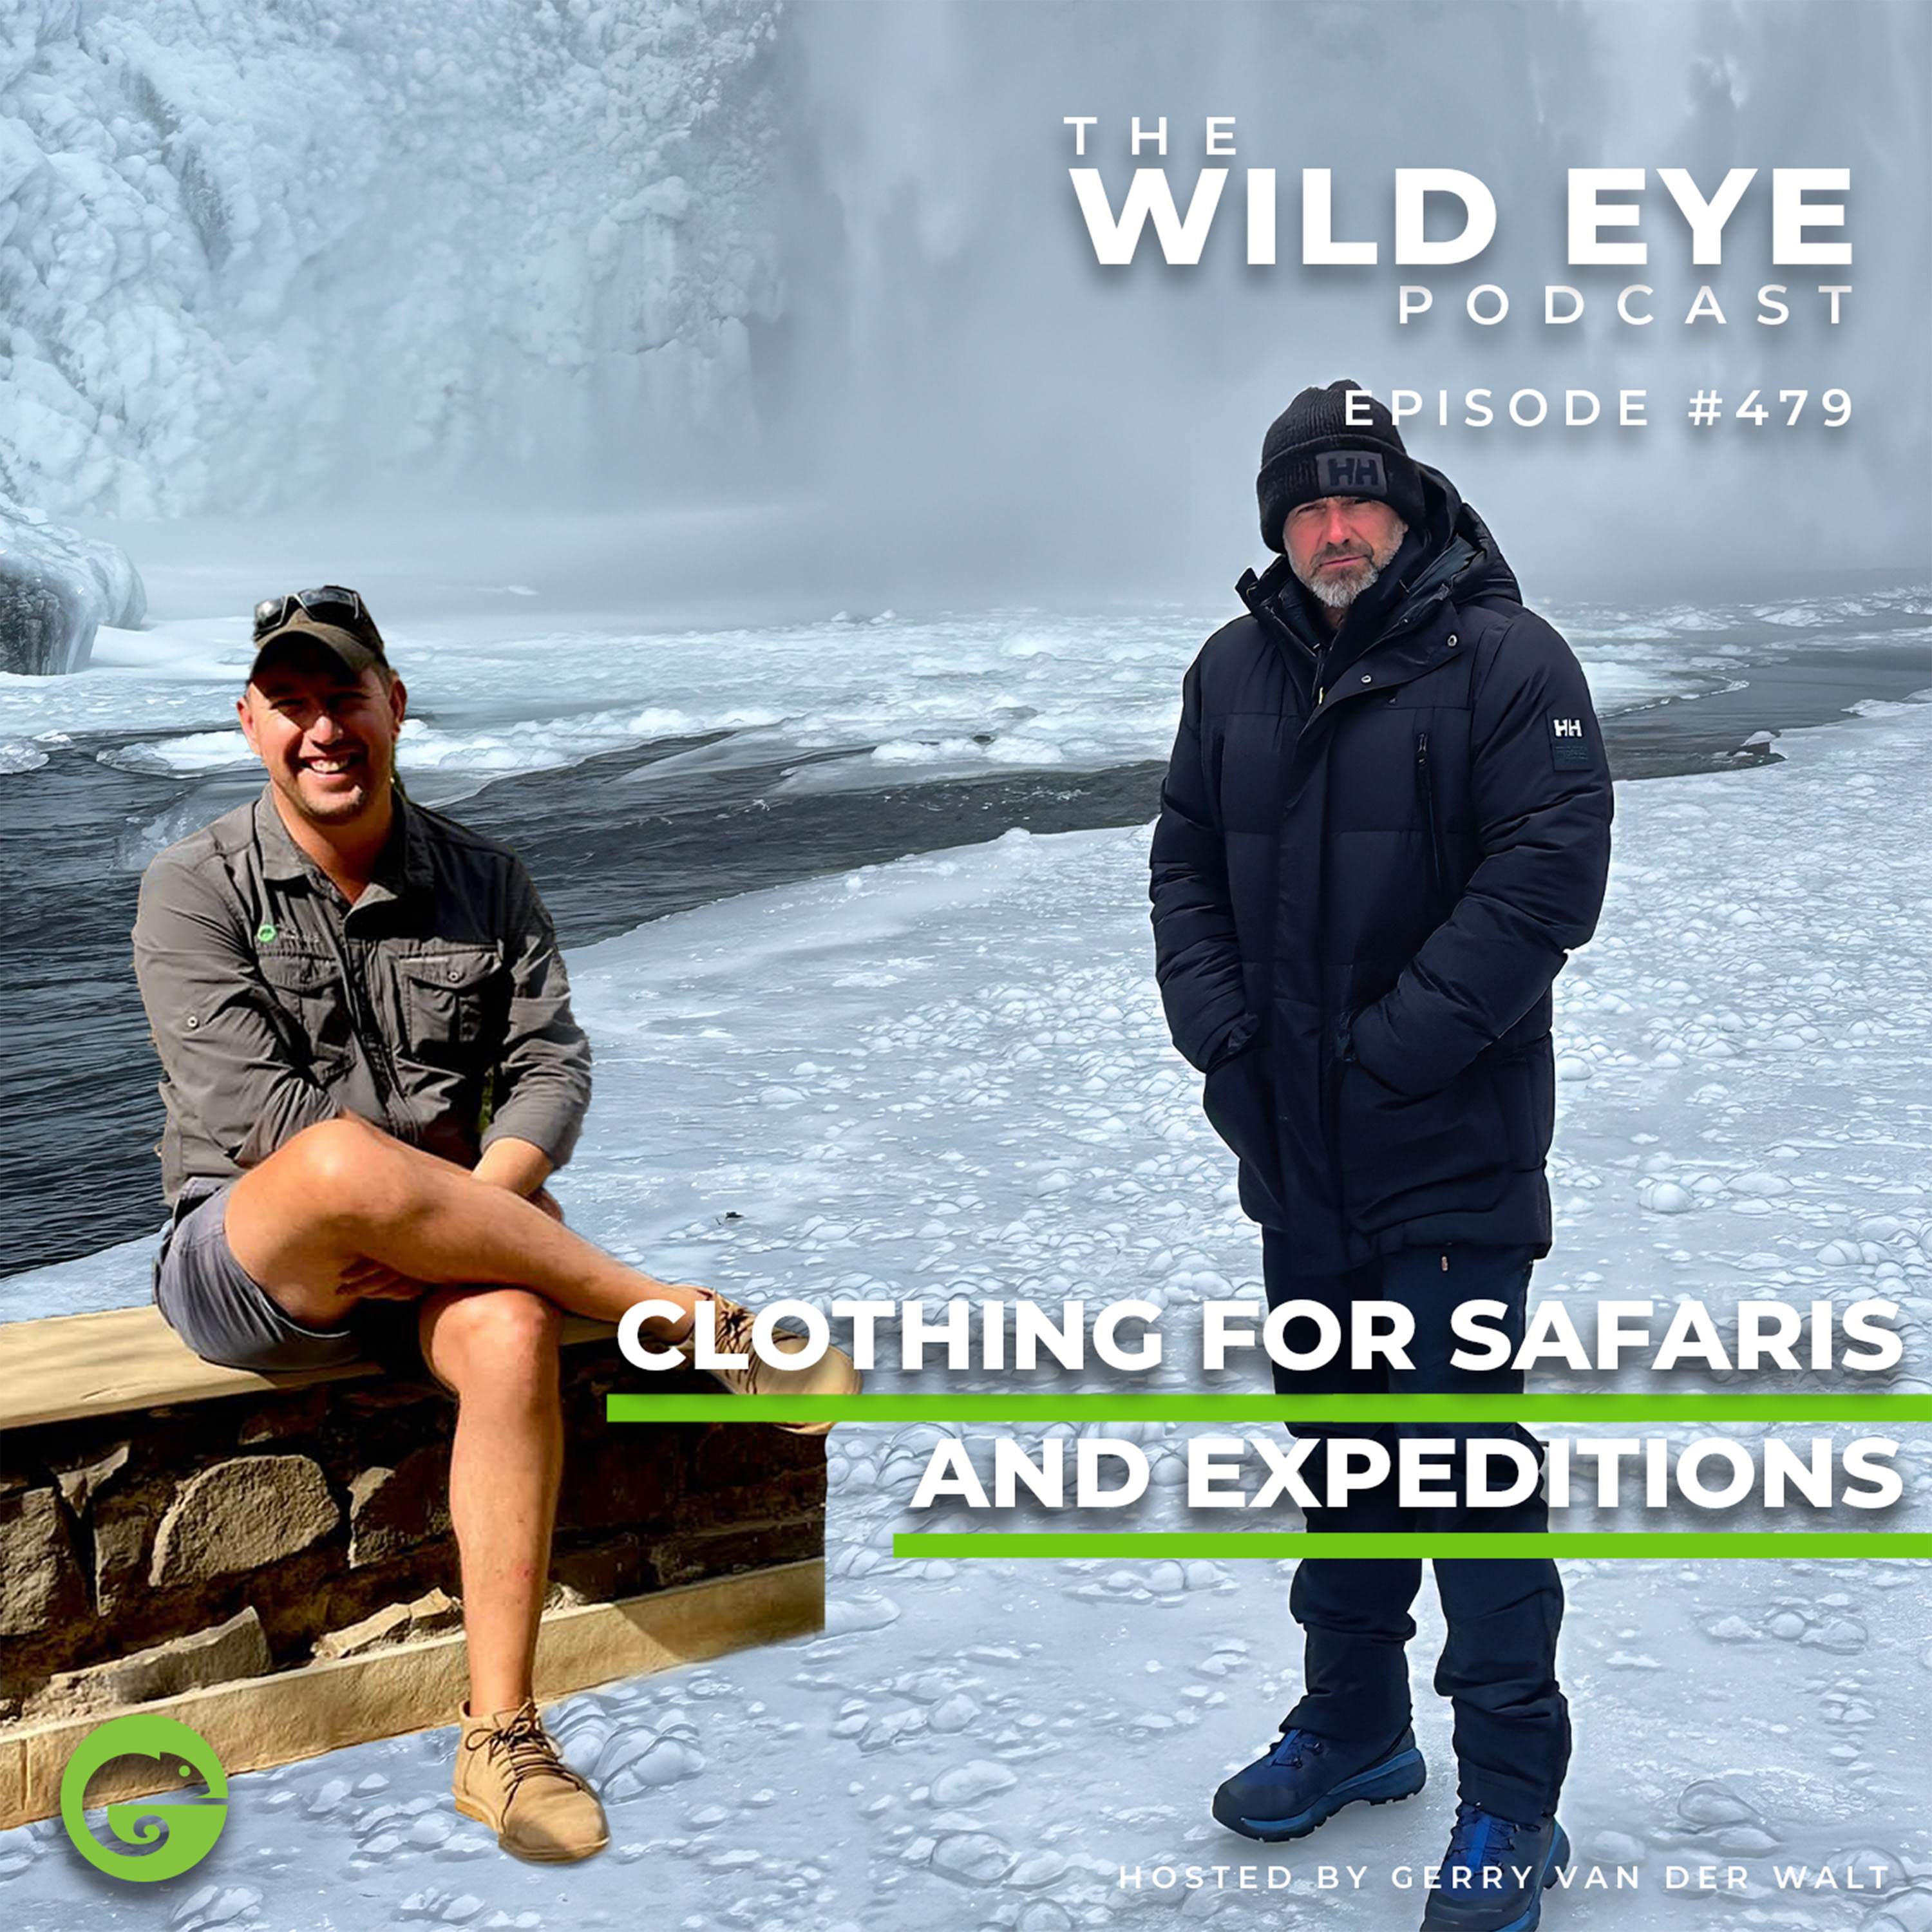 #479 - Clothing for safaris and expeditions